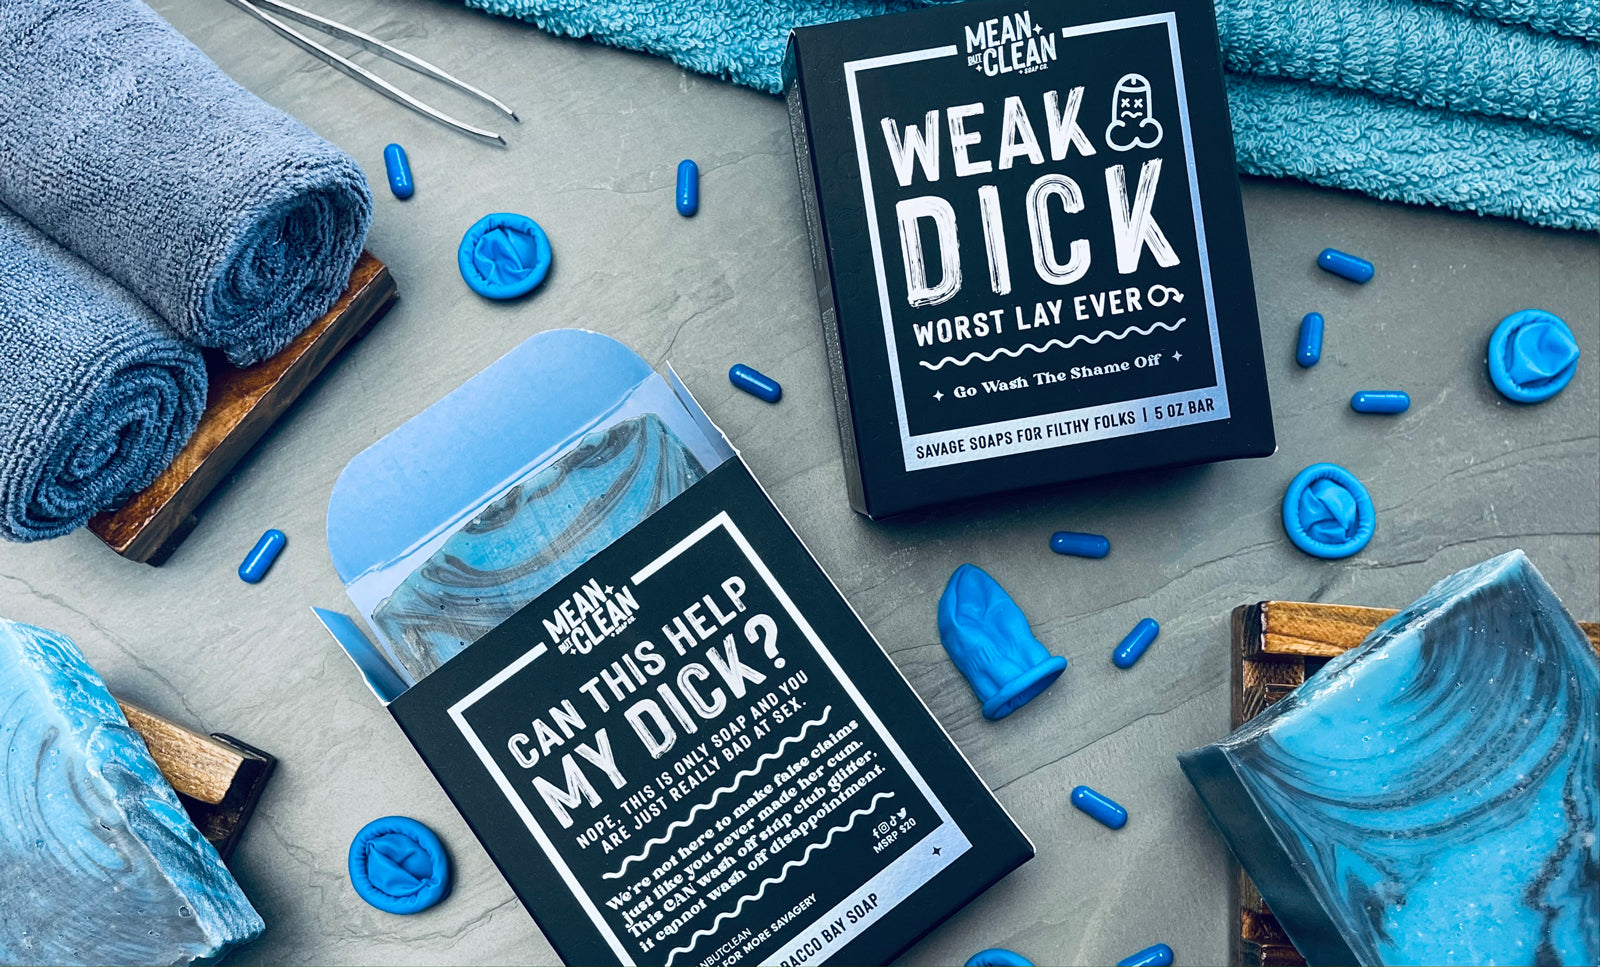 Who is Weak Dick Soap For?